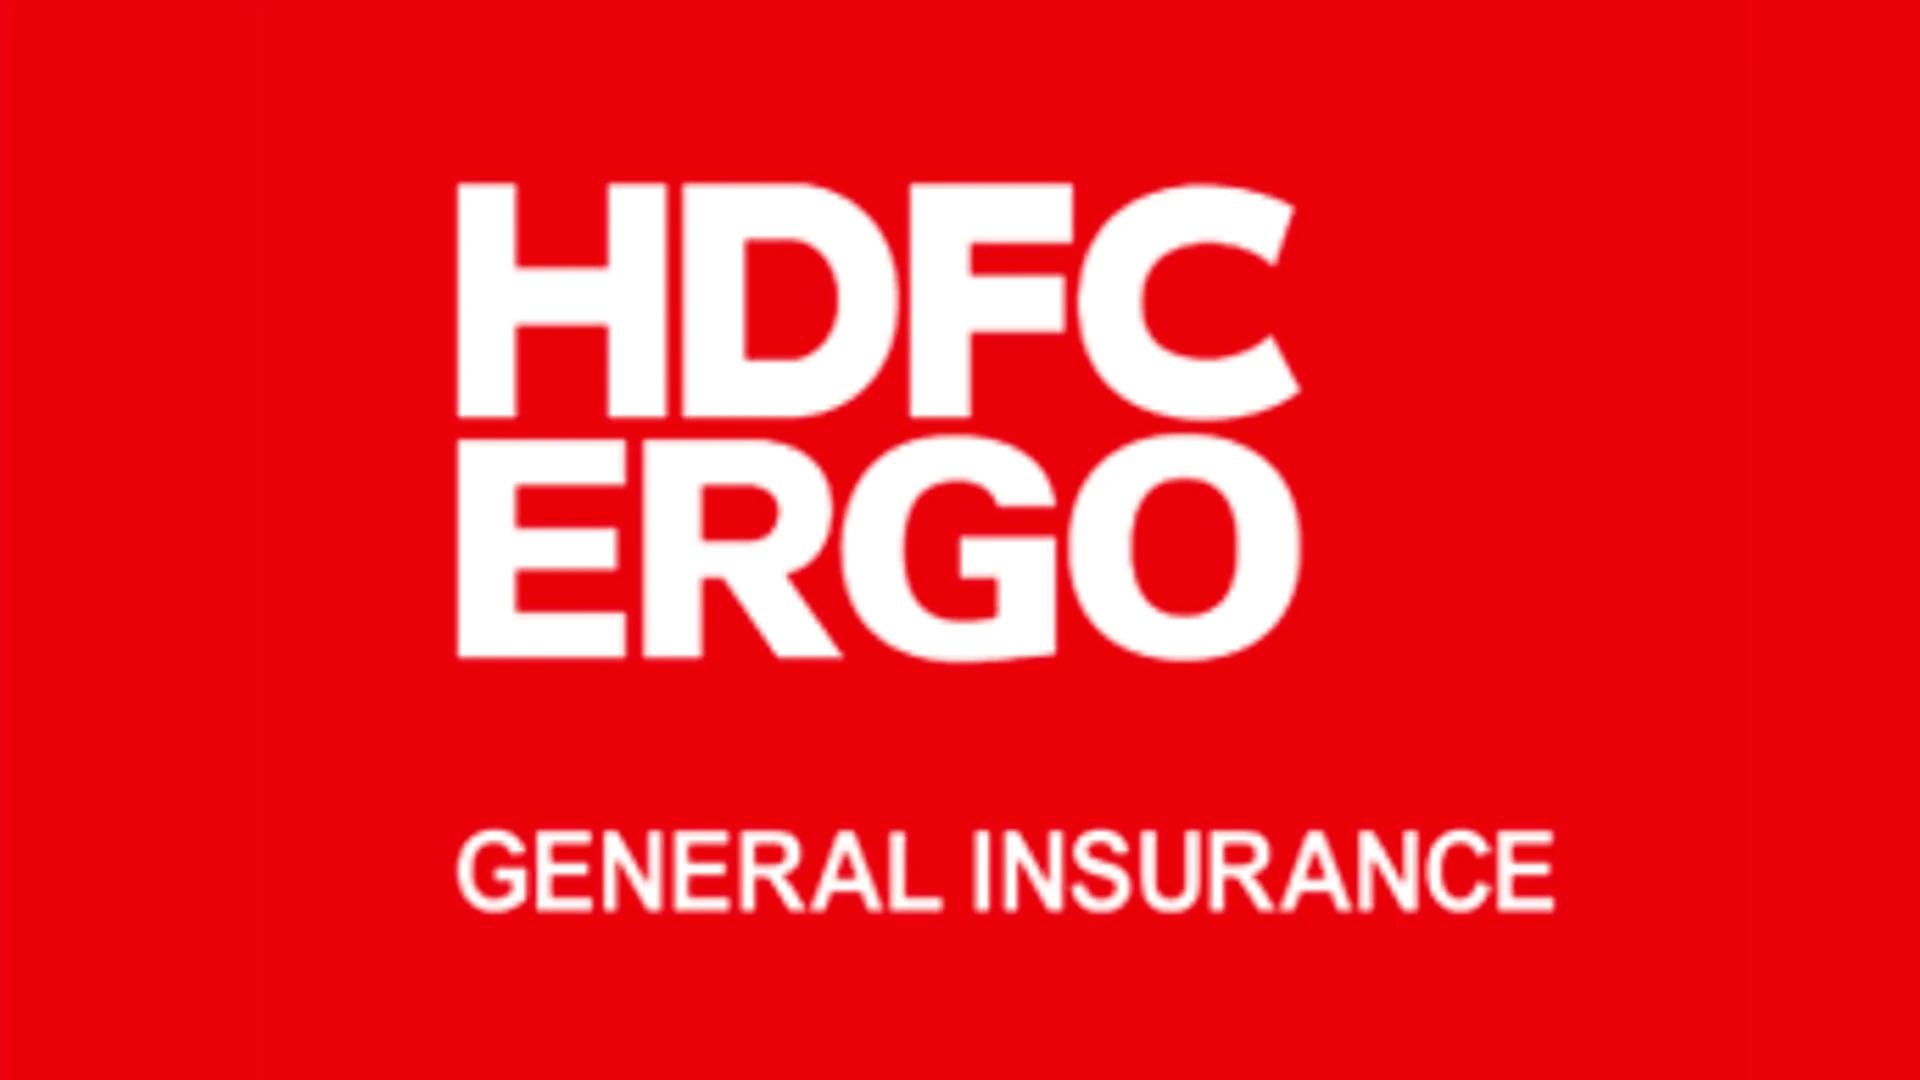 HDFC ERGO launches ‘All Things EV’ platform for present and future EV customers